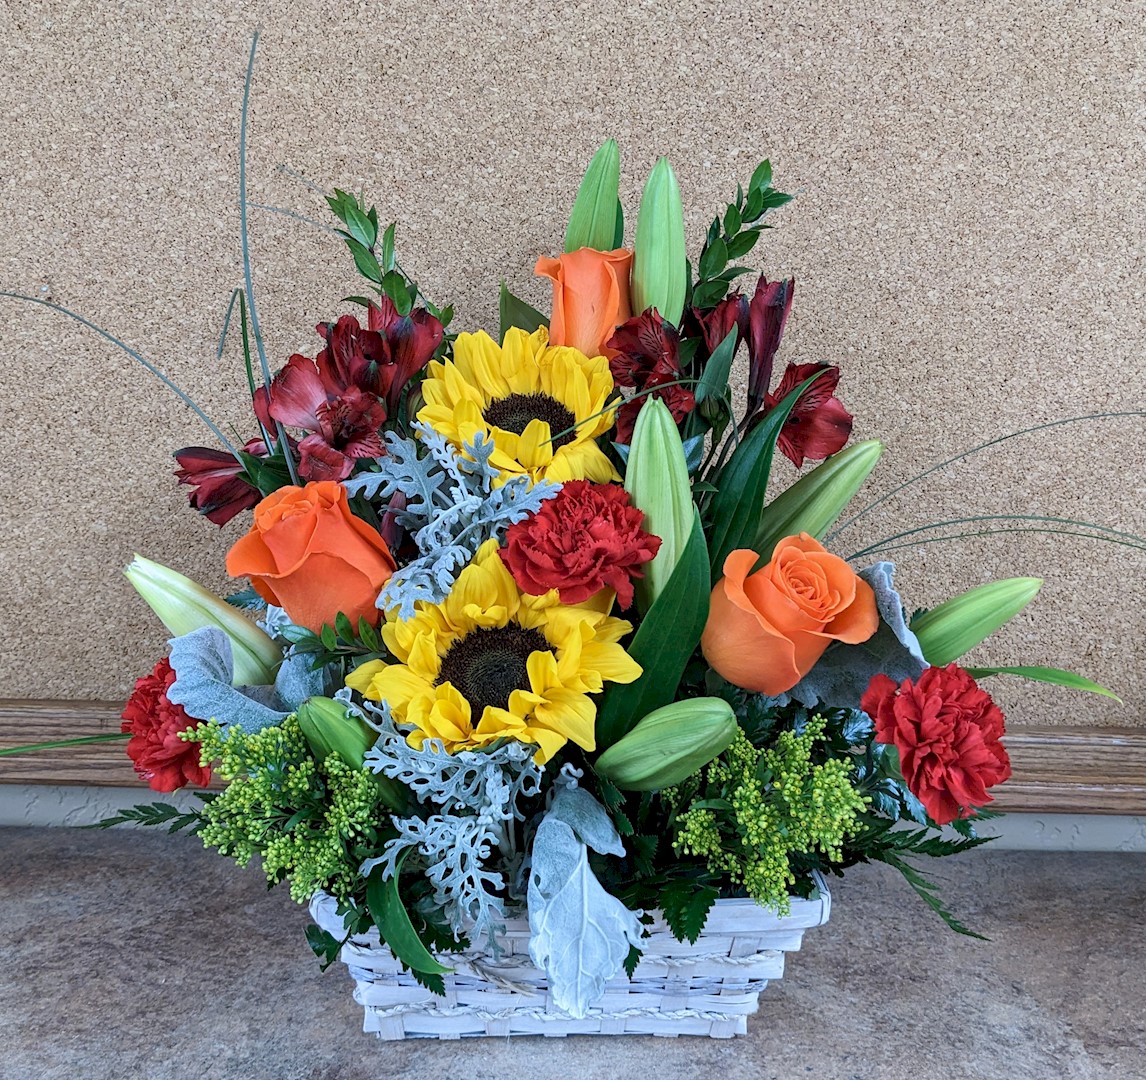 Flowers from Philip Motor, Inc. and Employees